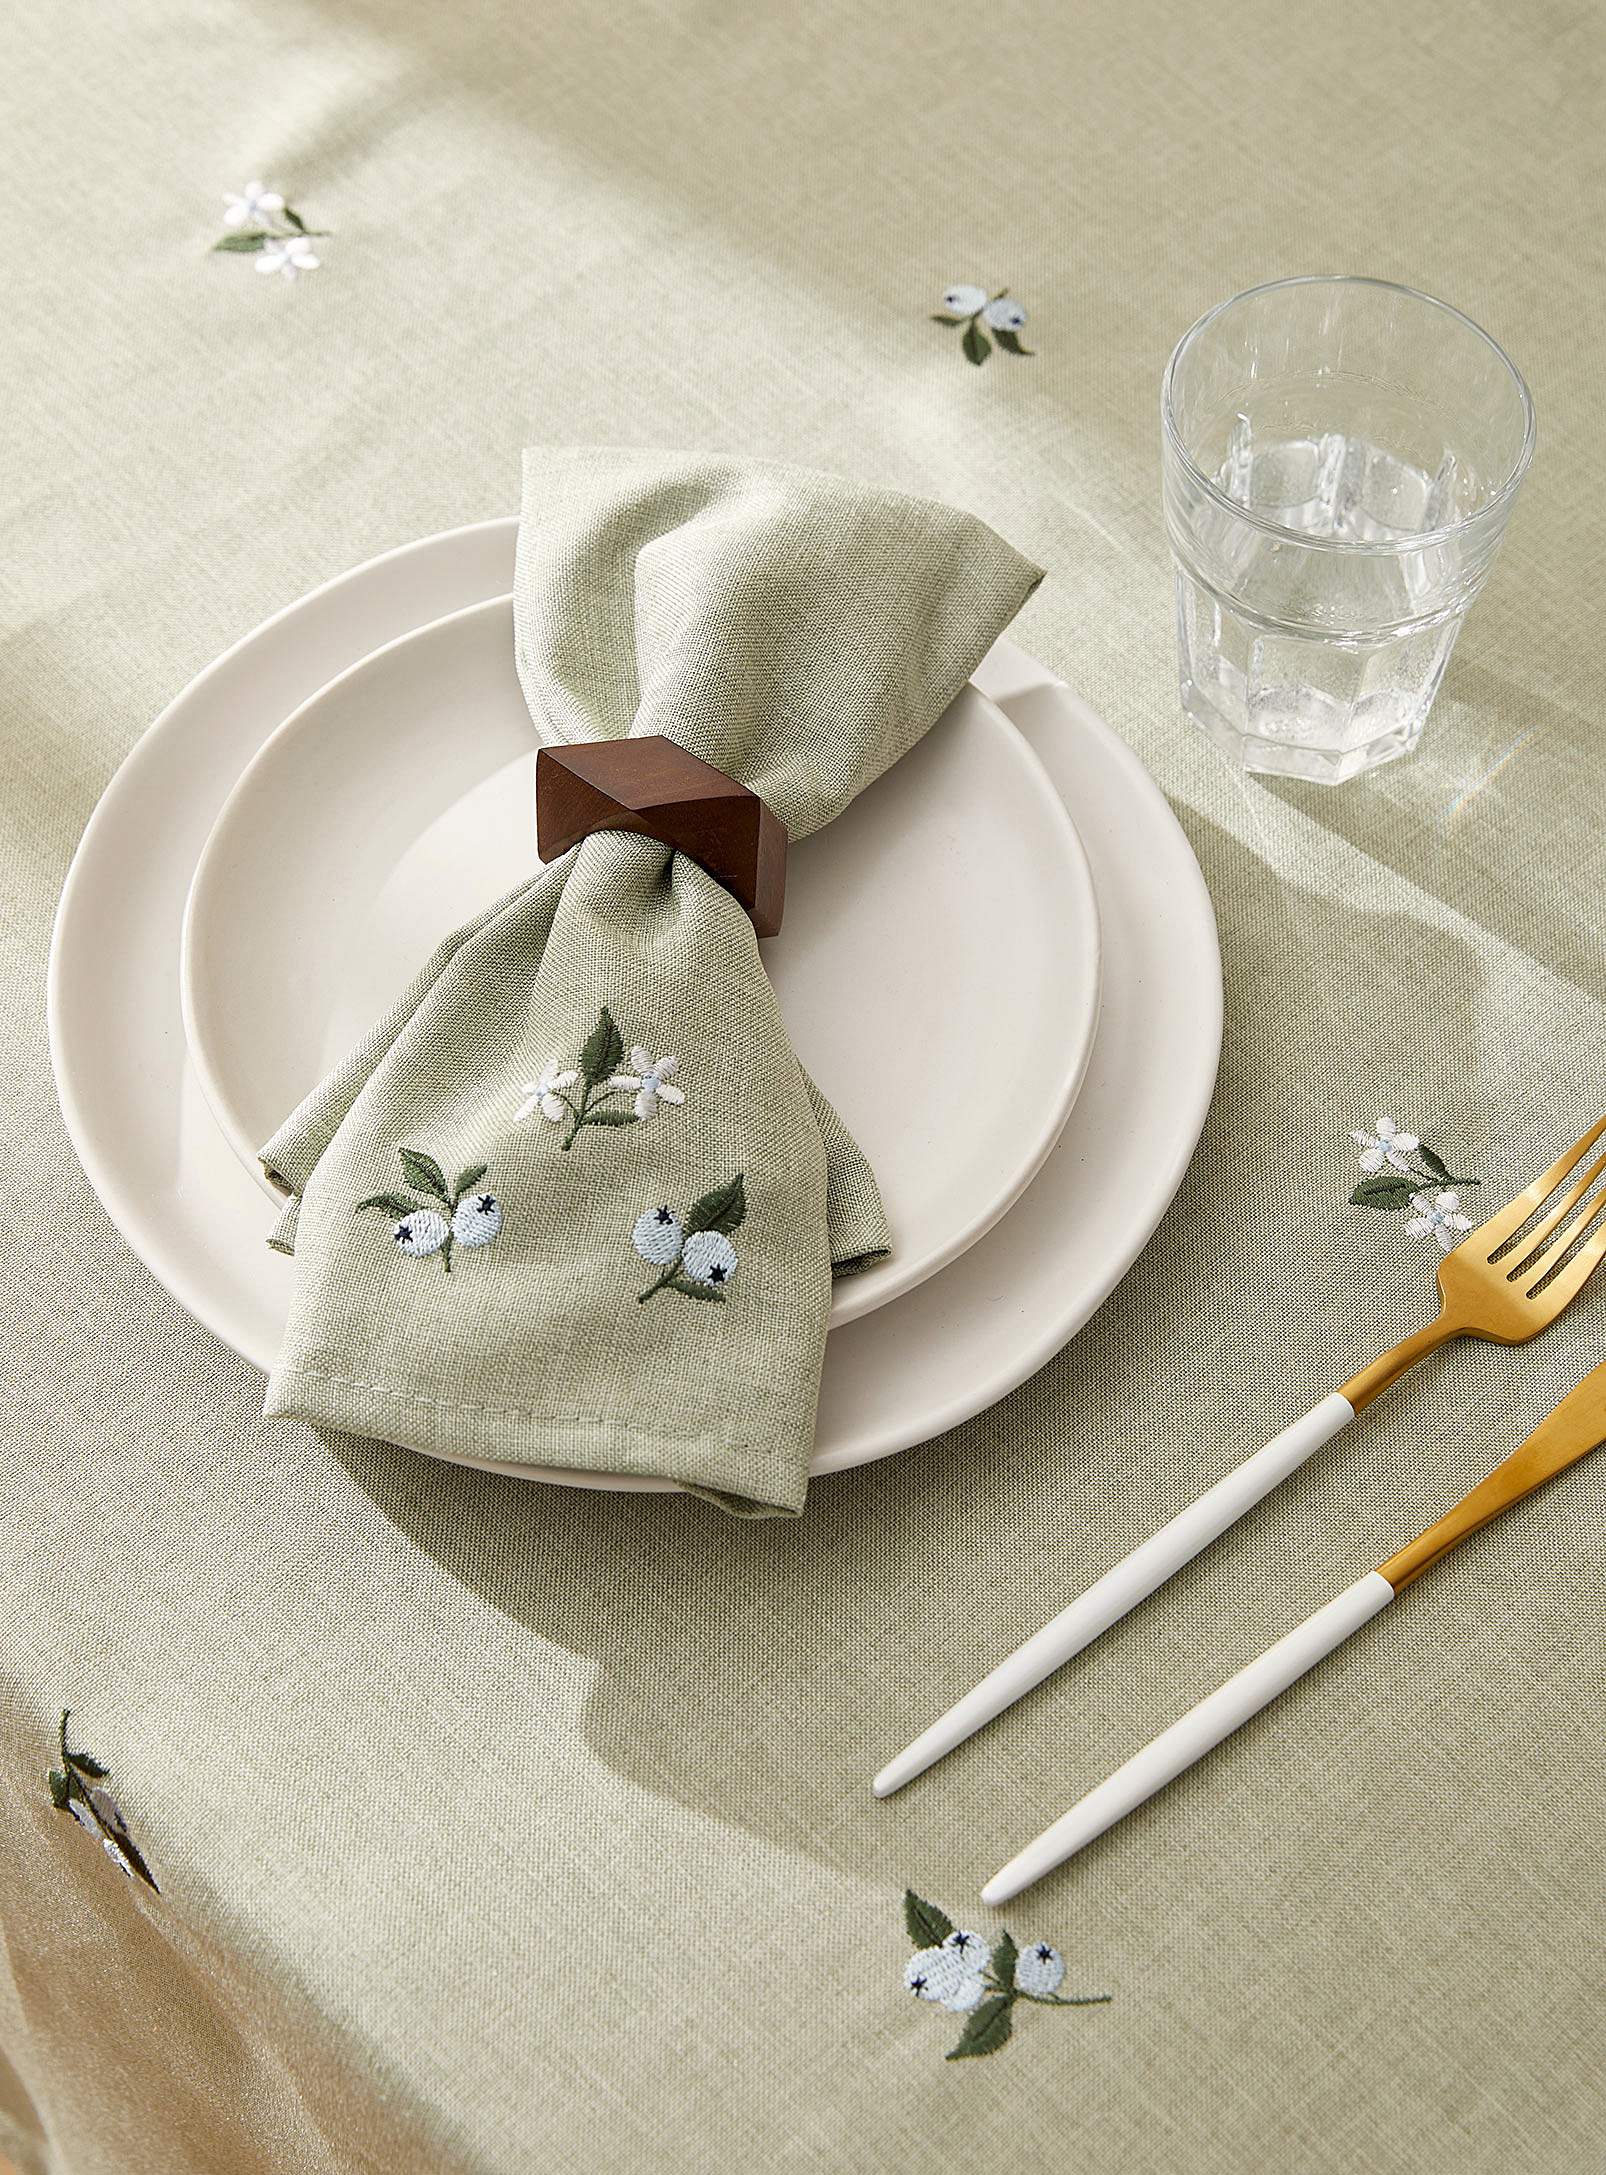 Simons Maison Embroidered Blueberry Napkin In Patterned Green